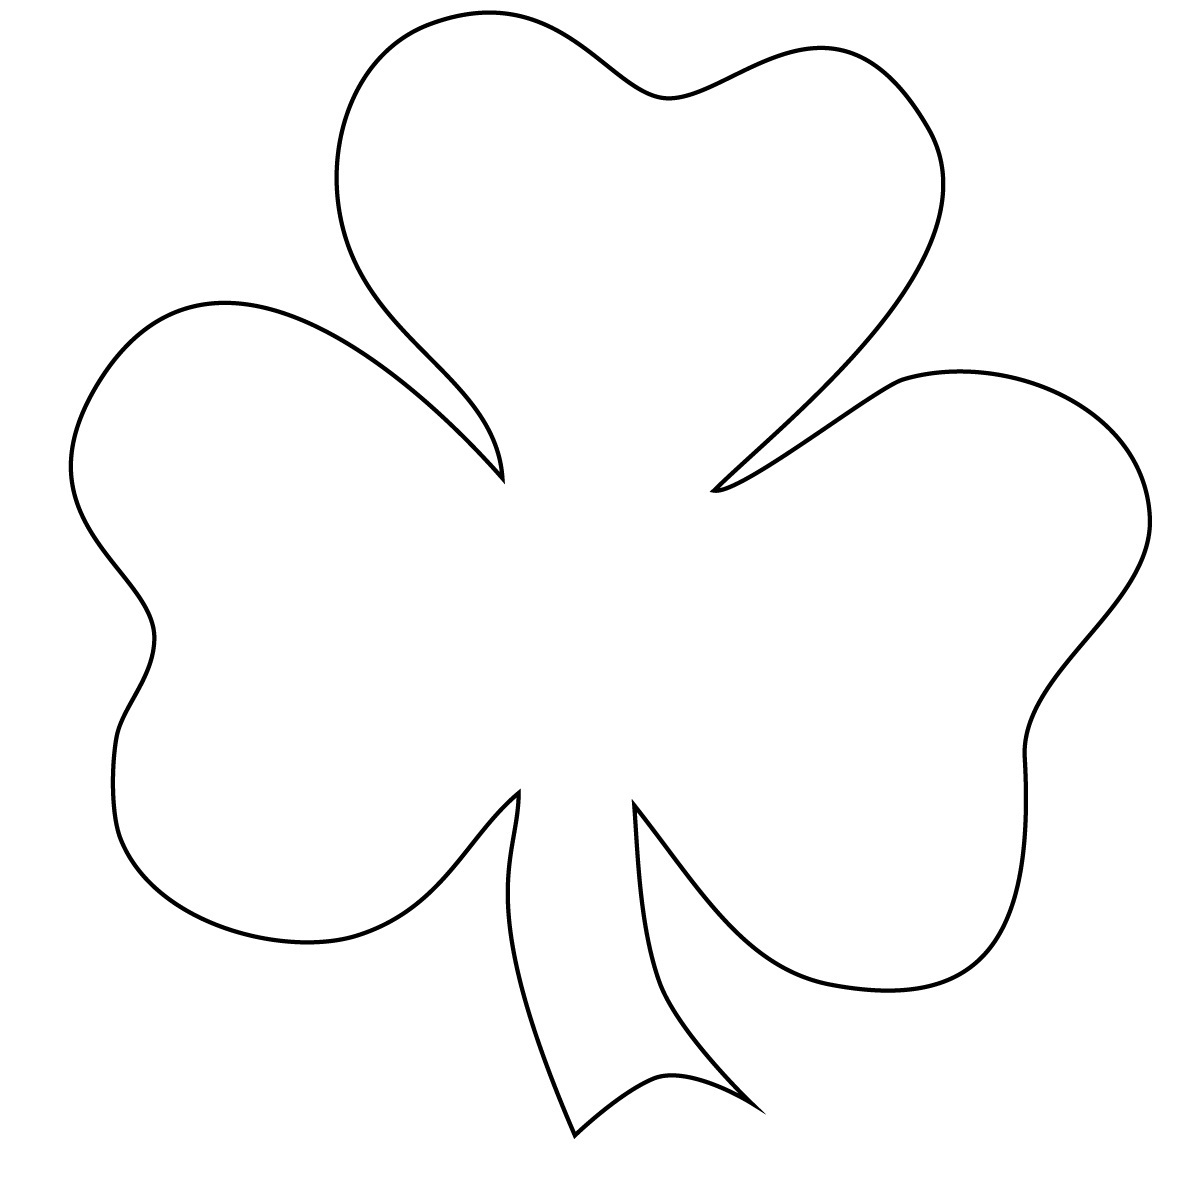 Coloring Pages To Prit Of Shamrocks 2